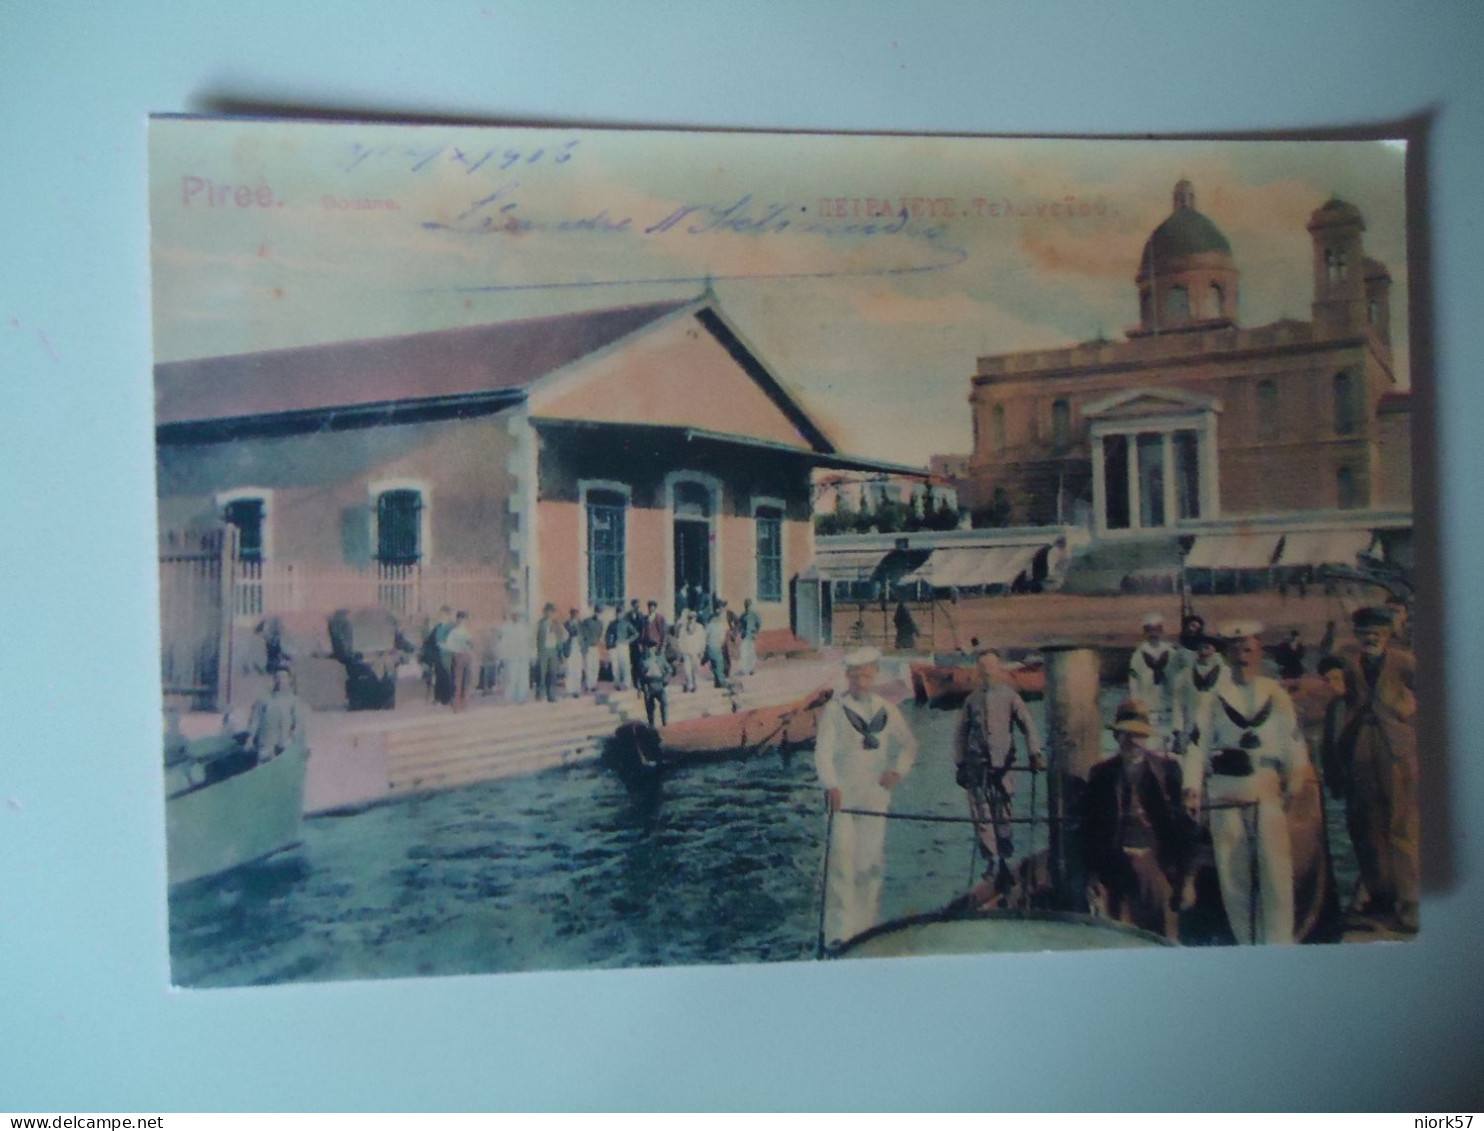 GREECE  POSTCARDS  1906 ΠΕΙΡΑΙΕΥΣ  ΙΣΩΣ  ΑΝΑΤΥΠΩΣΗ   FOR MORE PURCHASES 10% DISCOUNT - Griekenland